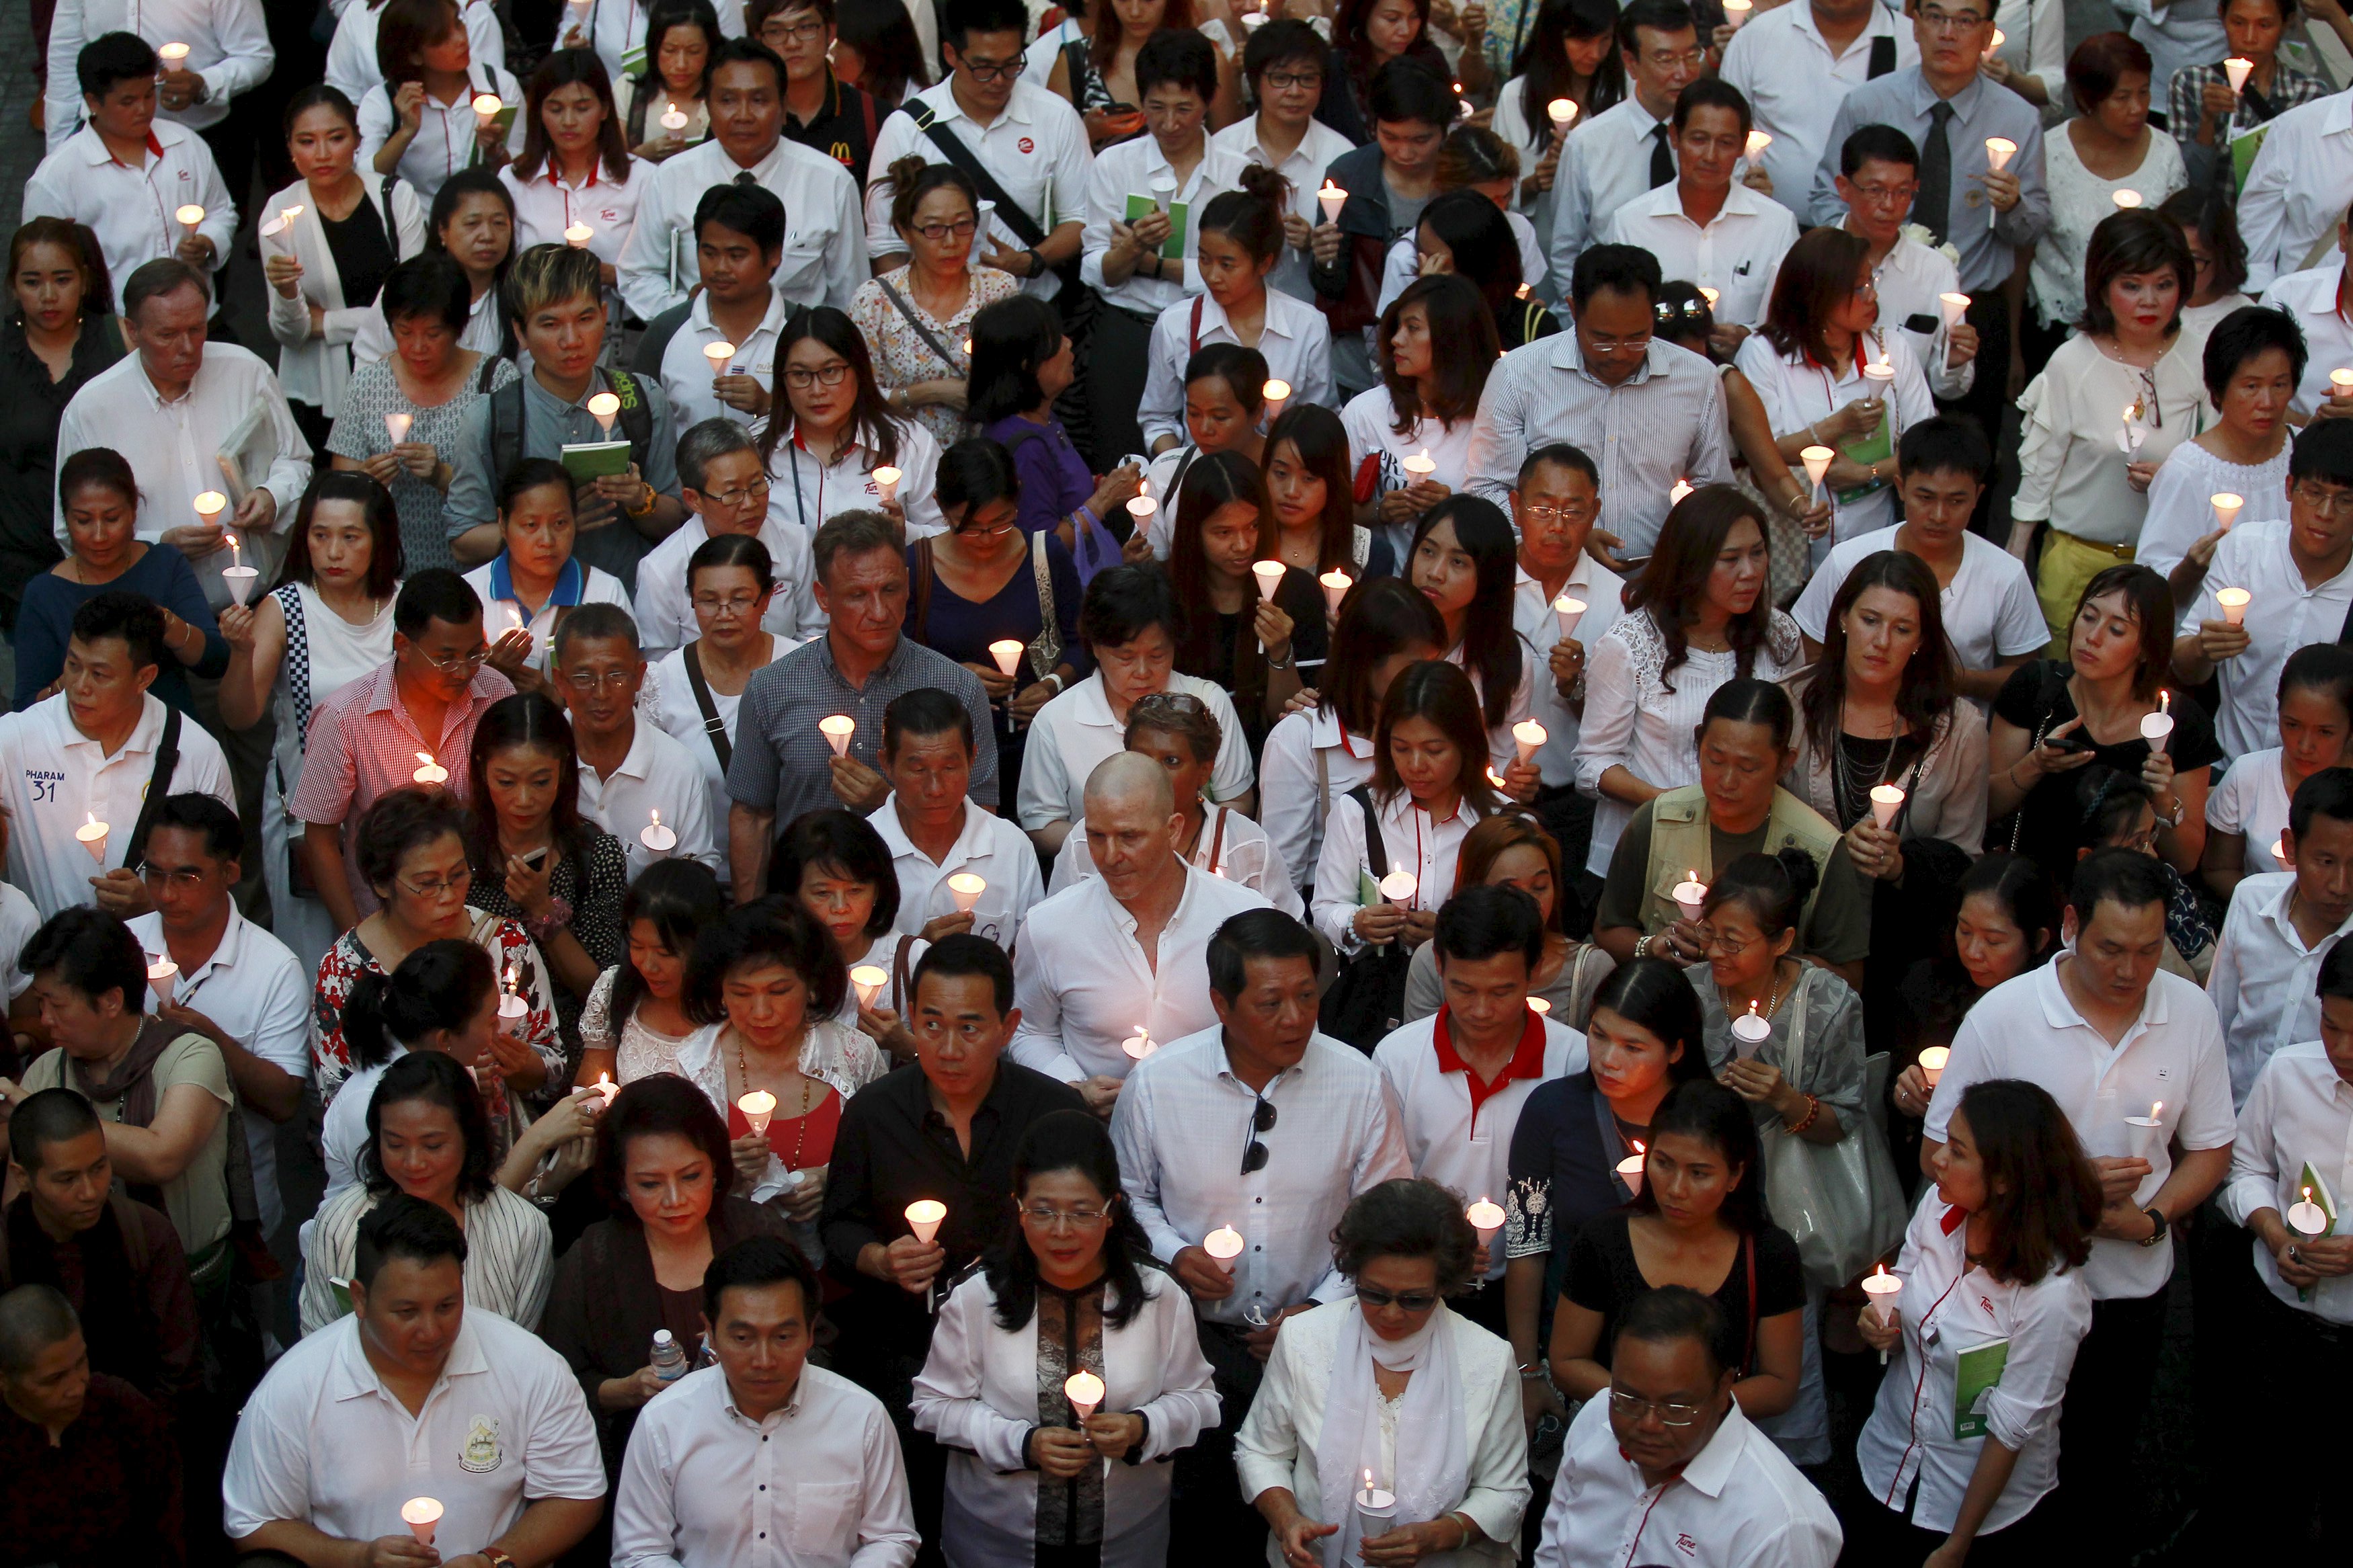 People light candles for victims during a march to the Erawan shrine in Bangkok. Photo: Reuters